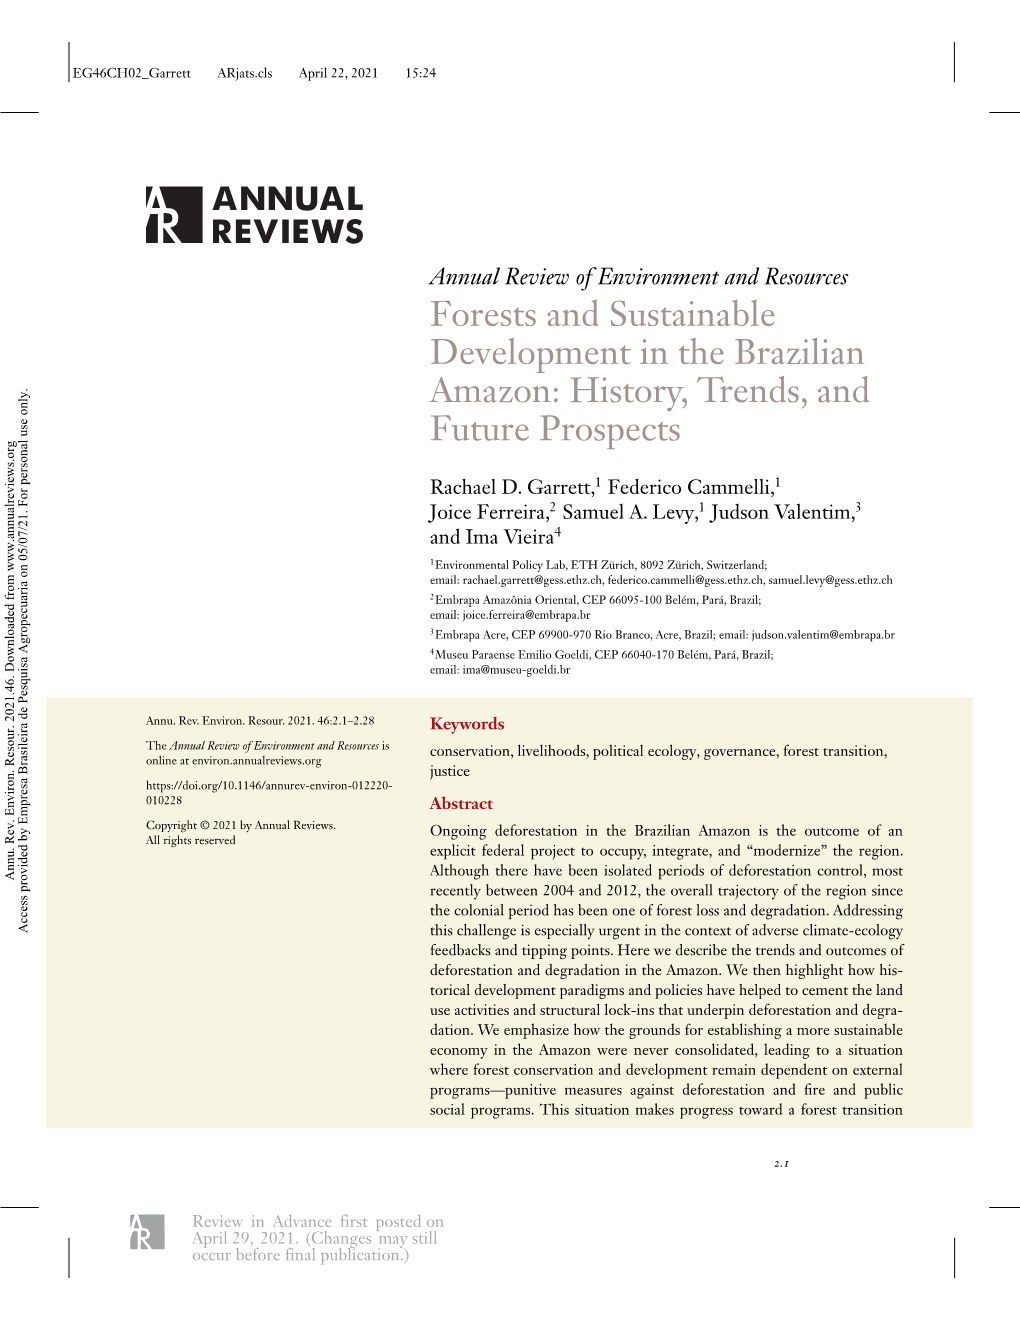 Forests and Sustainable Development in the Brazilian Amazon: History, Trends, and Future Prospects